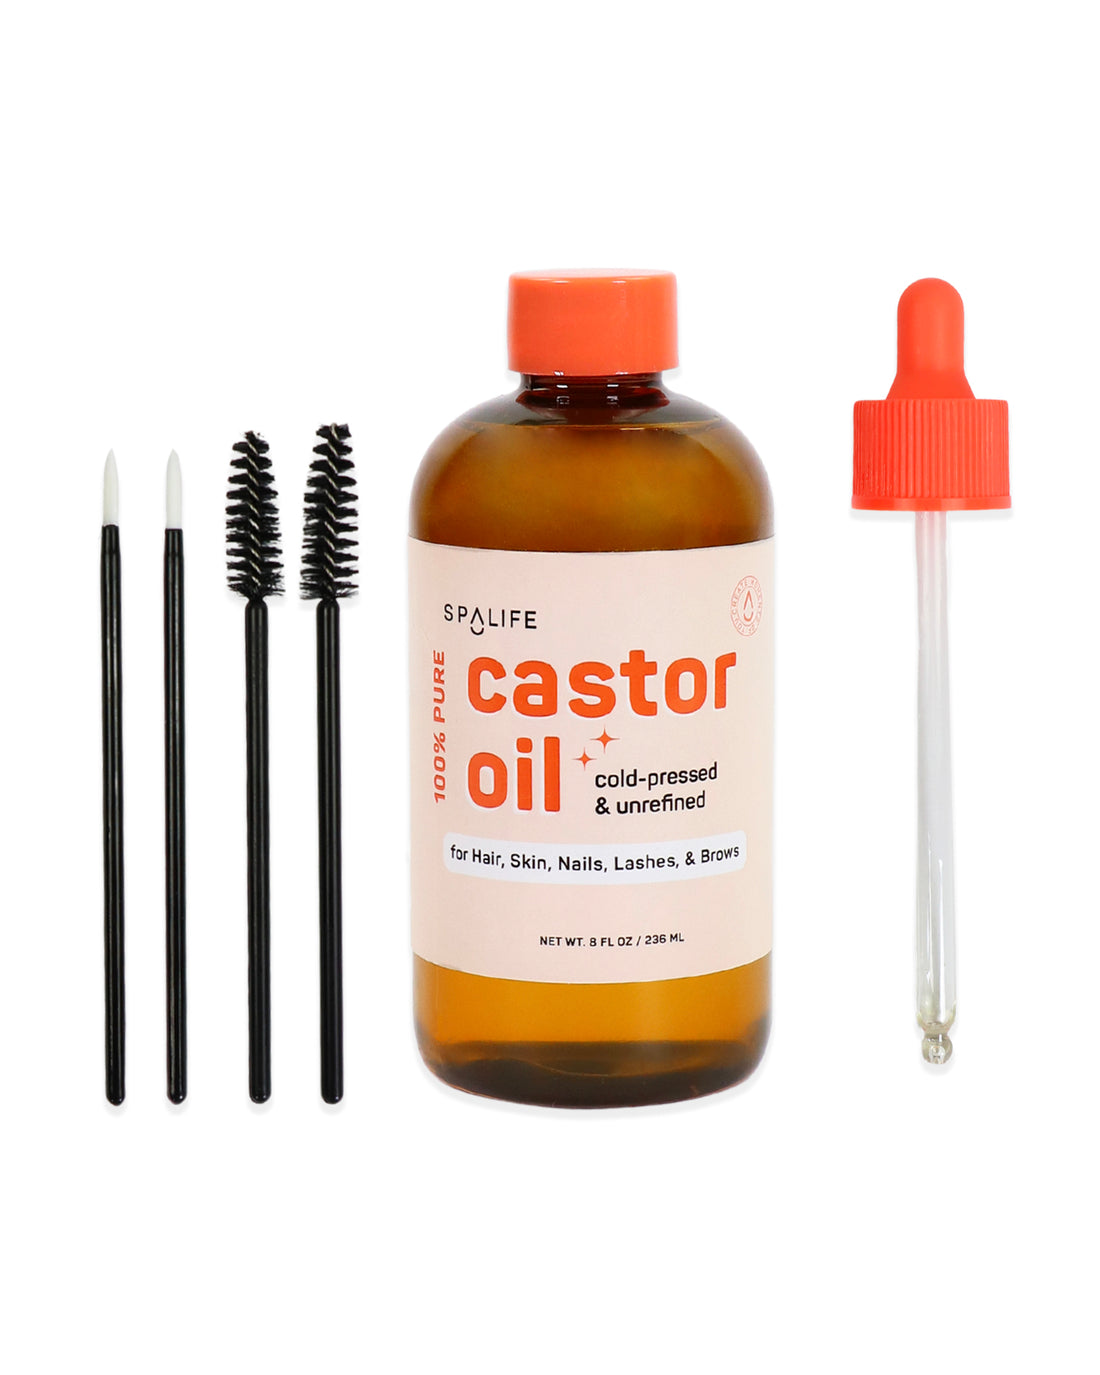 Pure_castor_oil_bottle_with_dr-277